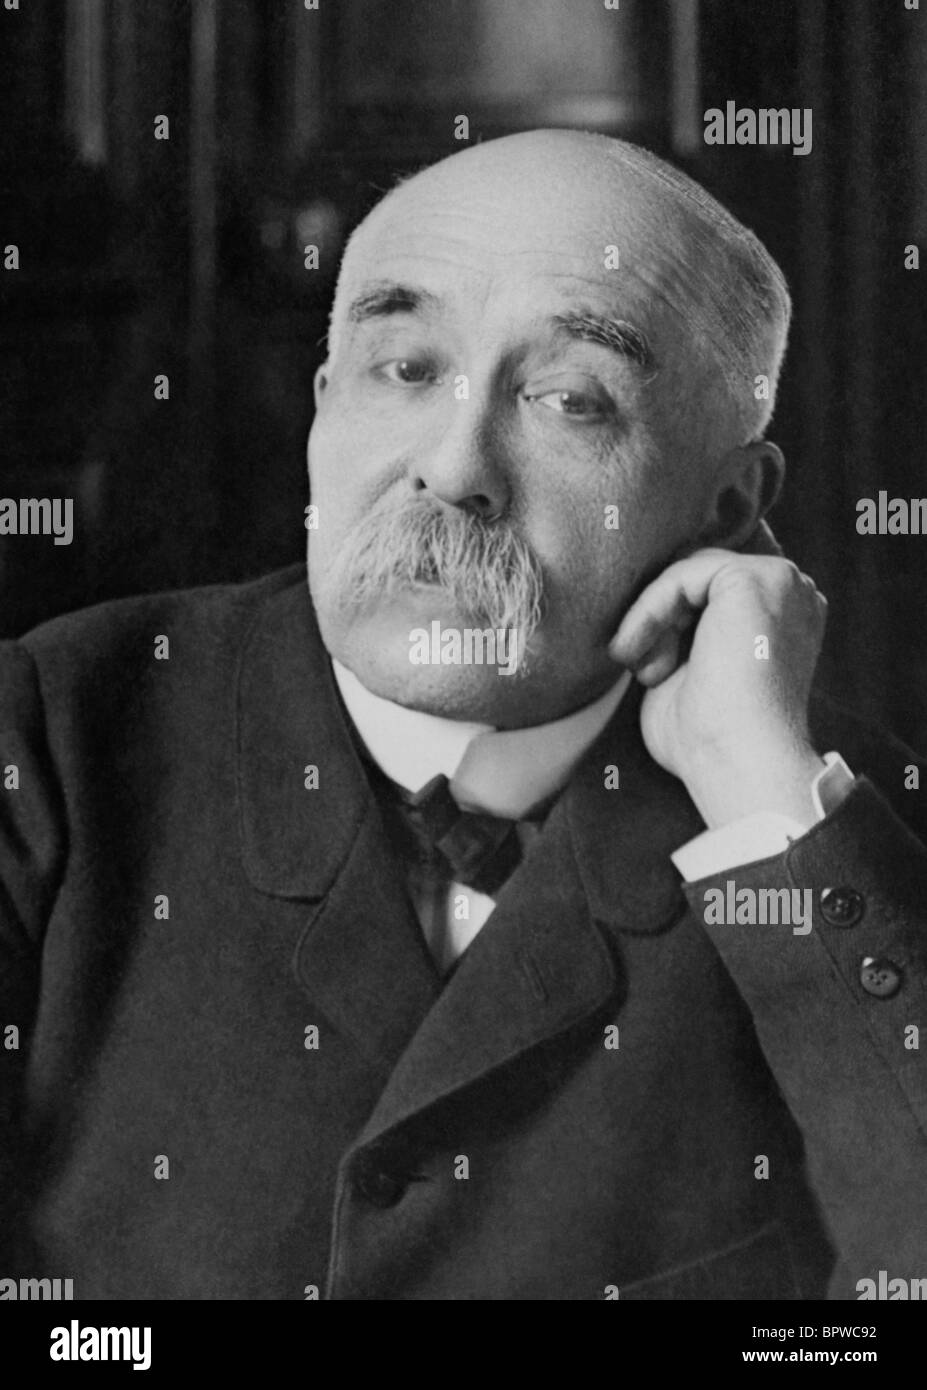 Portrait photo c1900s of French statesman Georges Clemenceau (1841 - 1929) - Prime Minister of France 1906 - 1909 + 1917 - 1920. Stock Photo